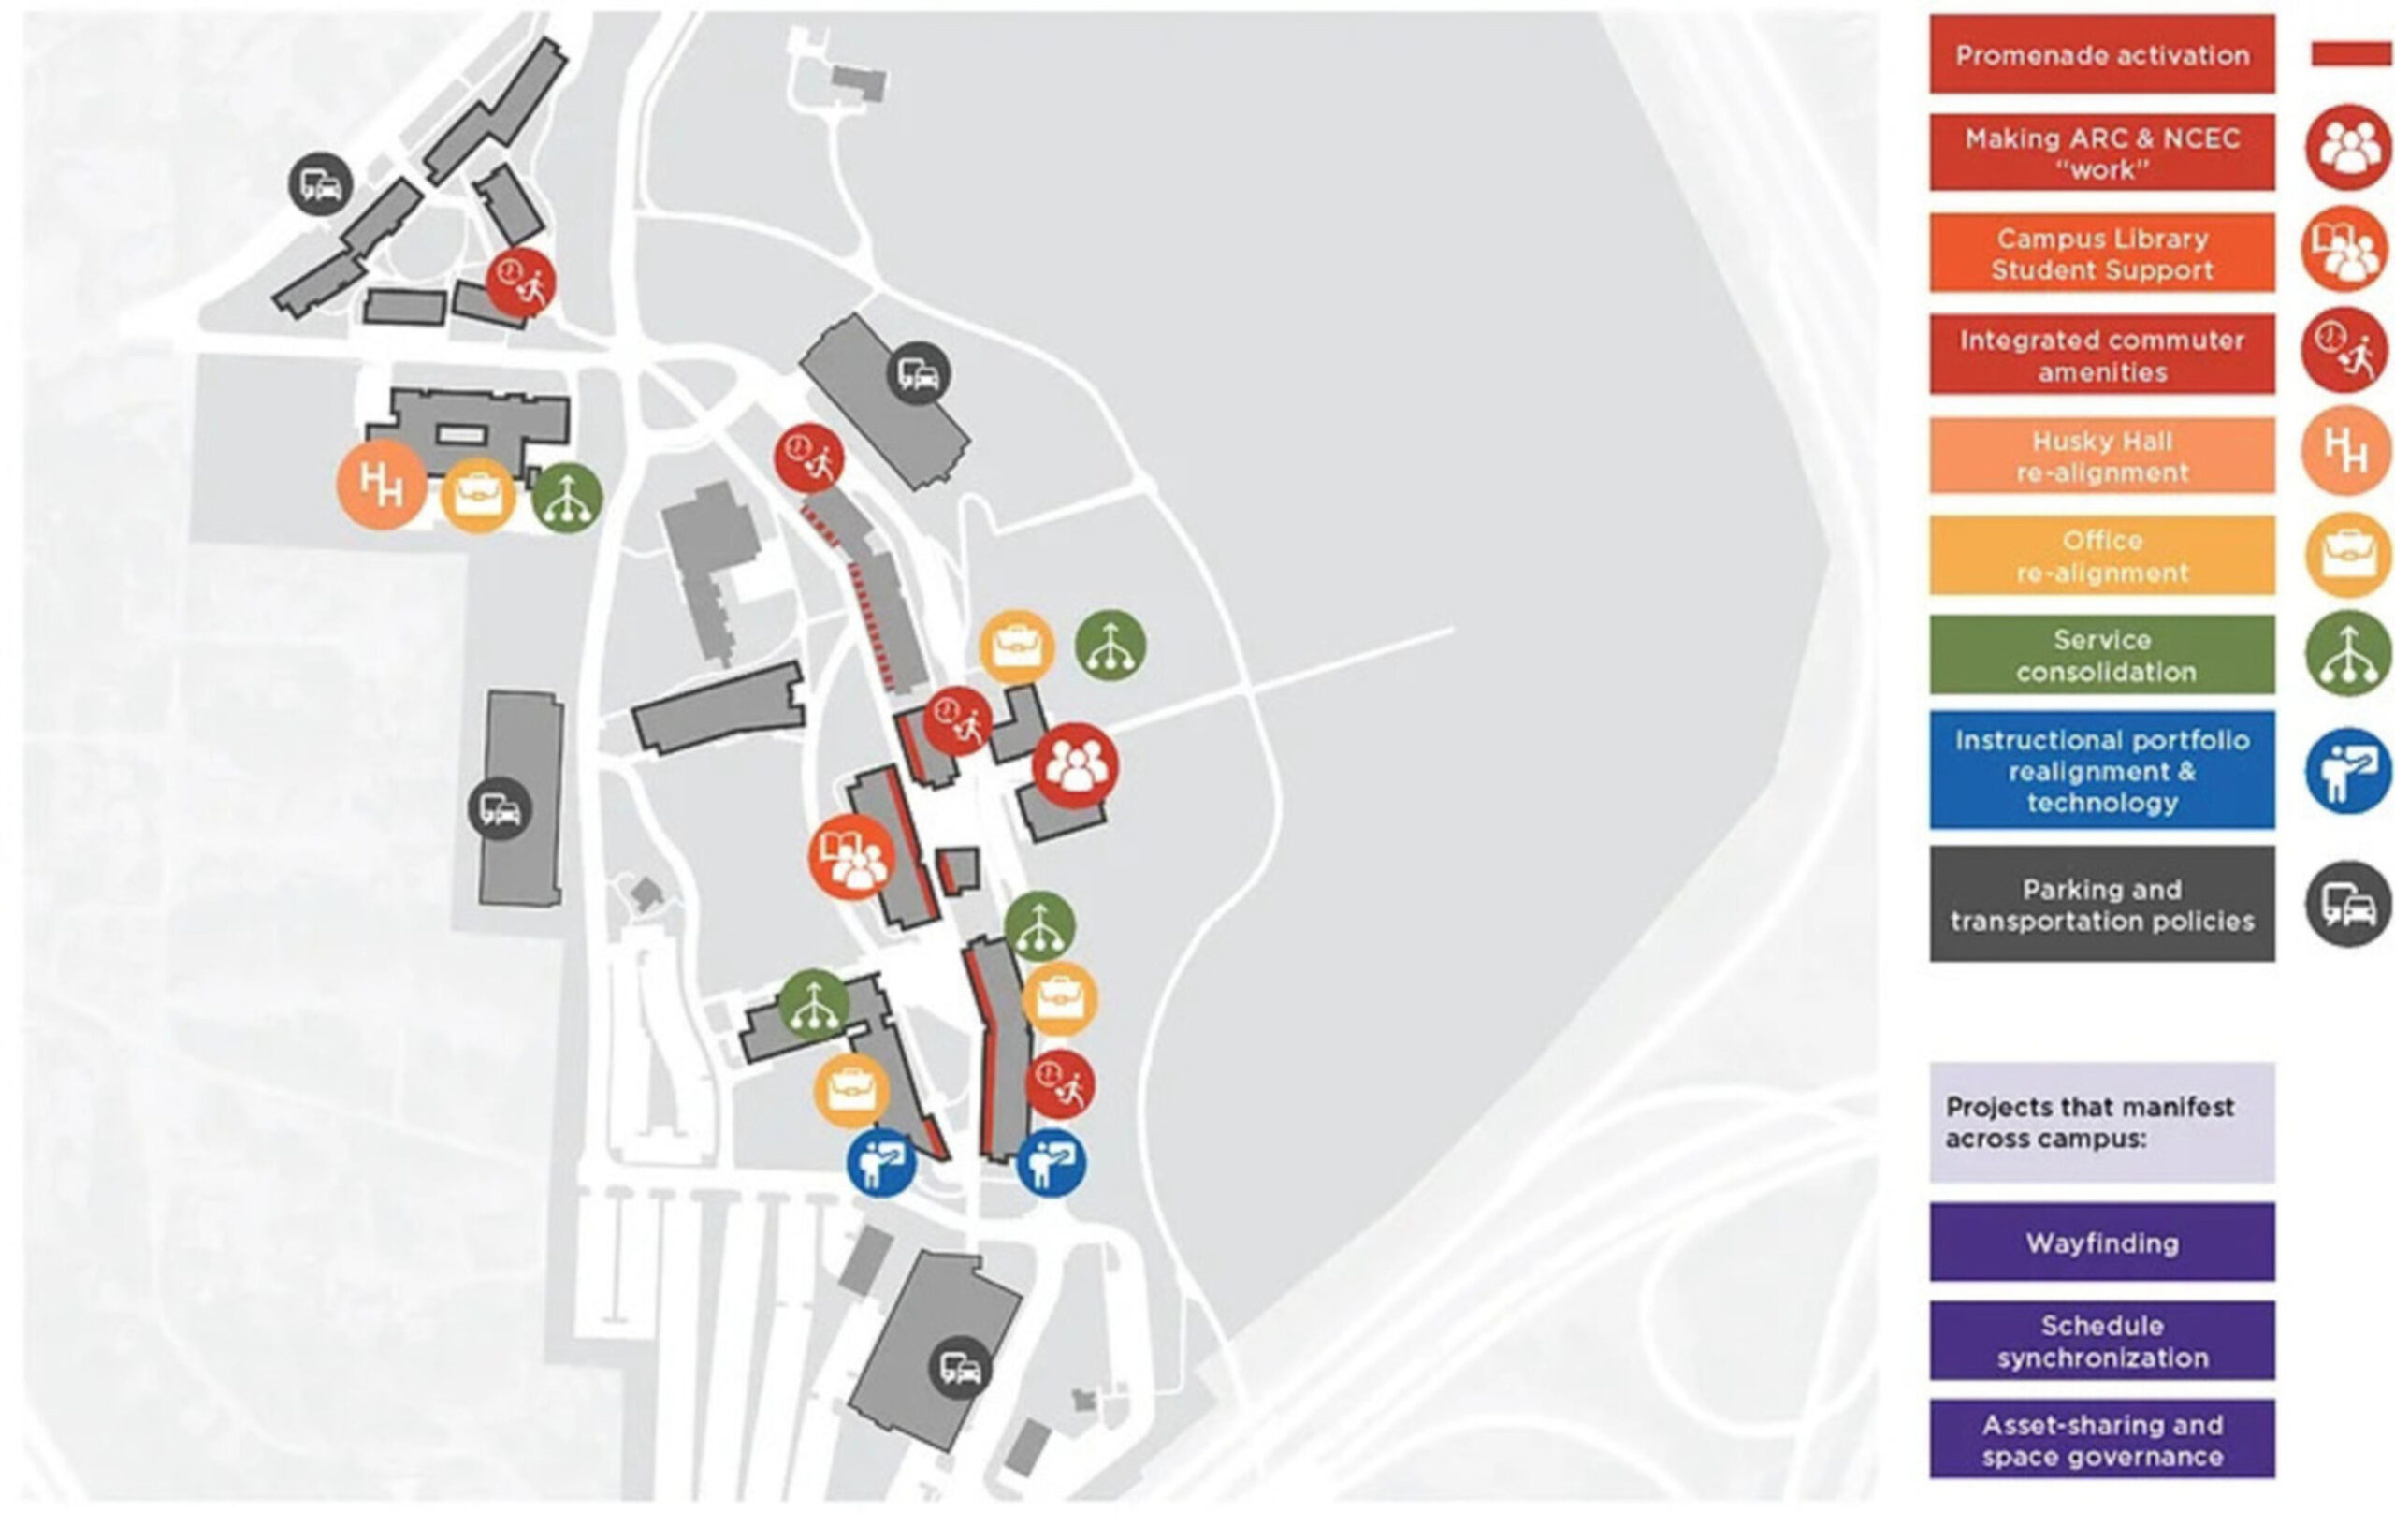 Campus map (on the left) with symbols marking various space optimization project locations such as the promenade activation, making of ARC & NCEC, campus library, student support, integrated commuter amenities, Husky Hall, realignment of offices, service consolidation, instructional portfolio realignment & technology, parking and transportation policies, wayfinding, schedule synchronization, and asset-sharing. A legend mapping the symbols to the individual project(on the right) is also shown.